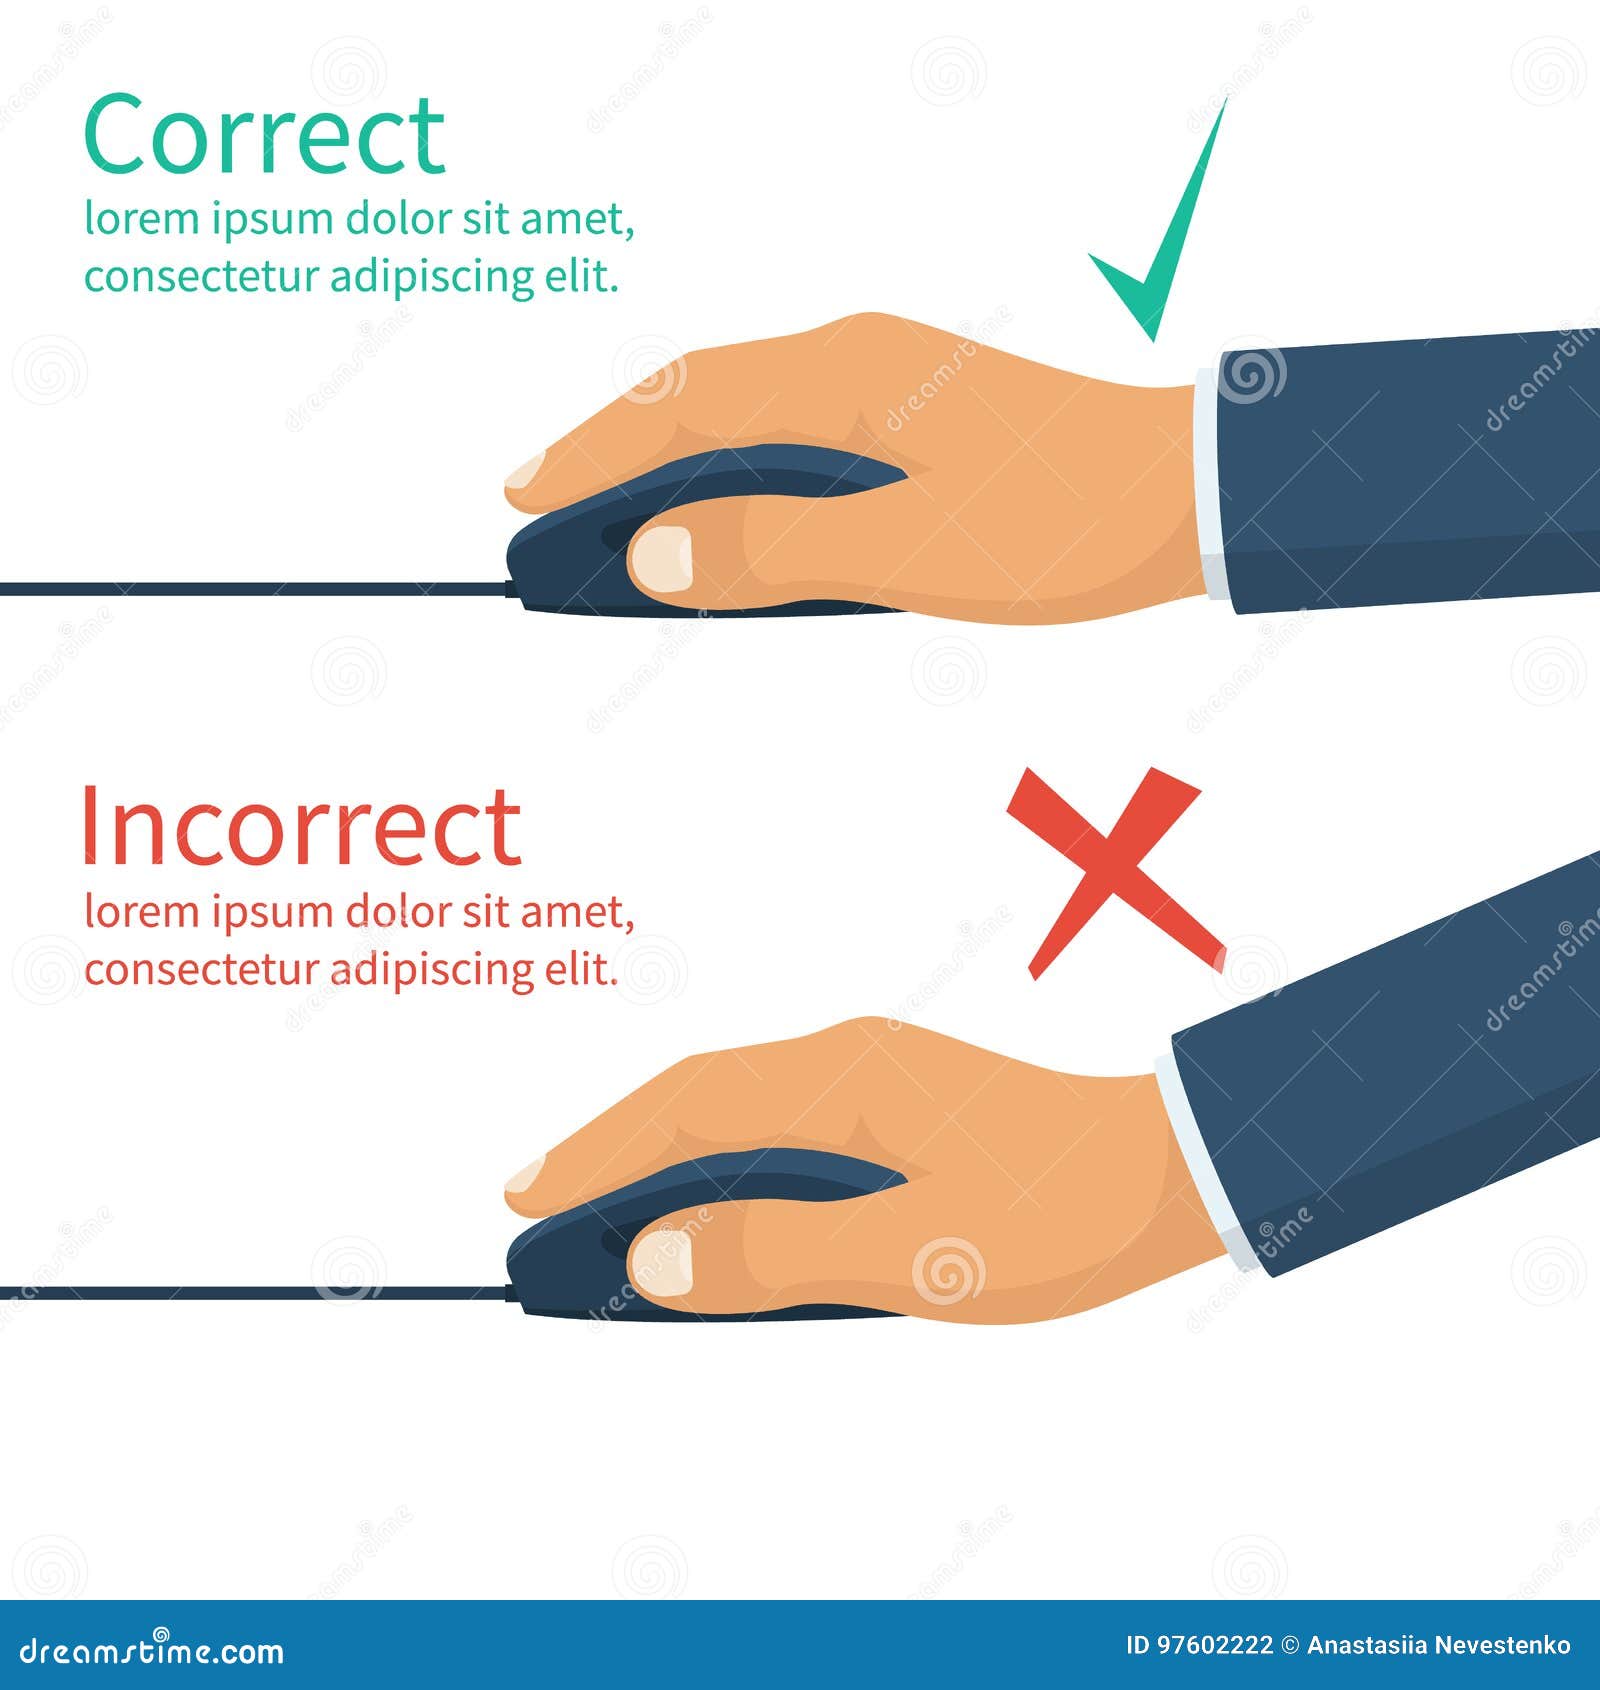 correct and incorrect position of hands on mouse